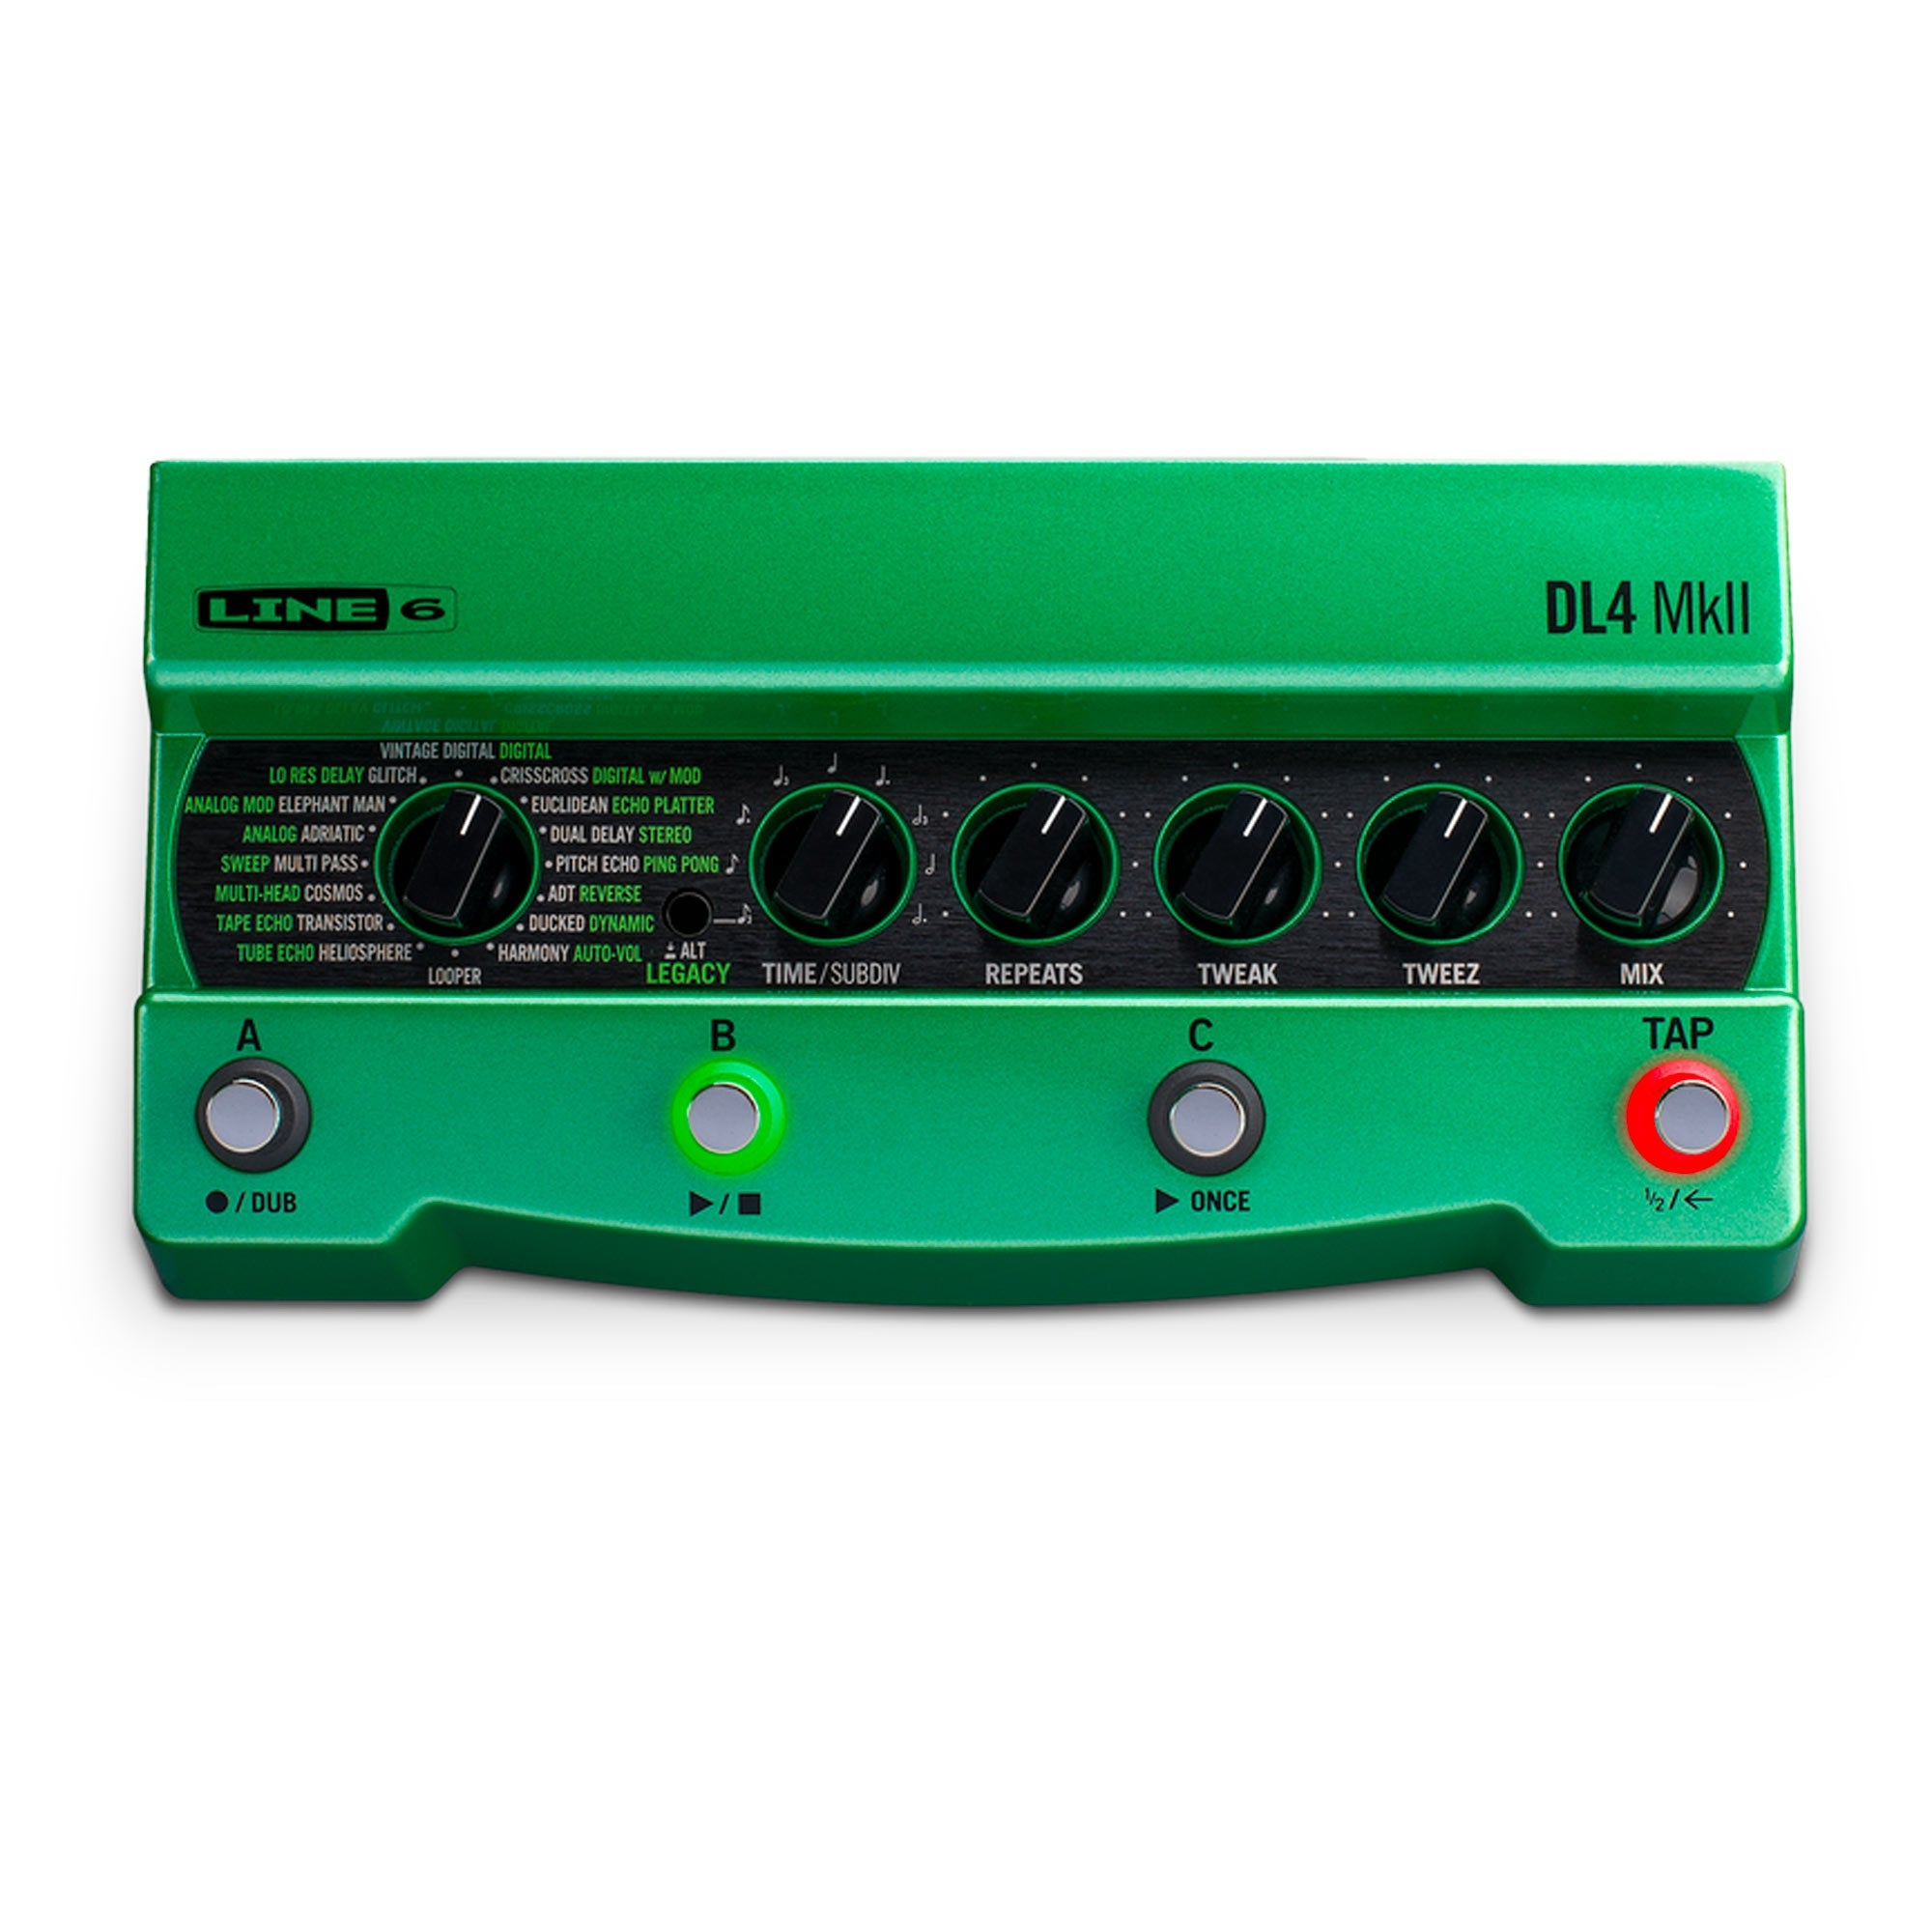 Line 6 DL4 MKII Delay Looper Effect Pedal | The Music Zoo